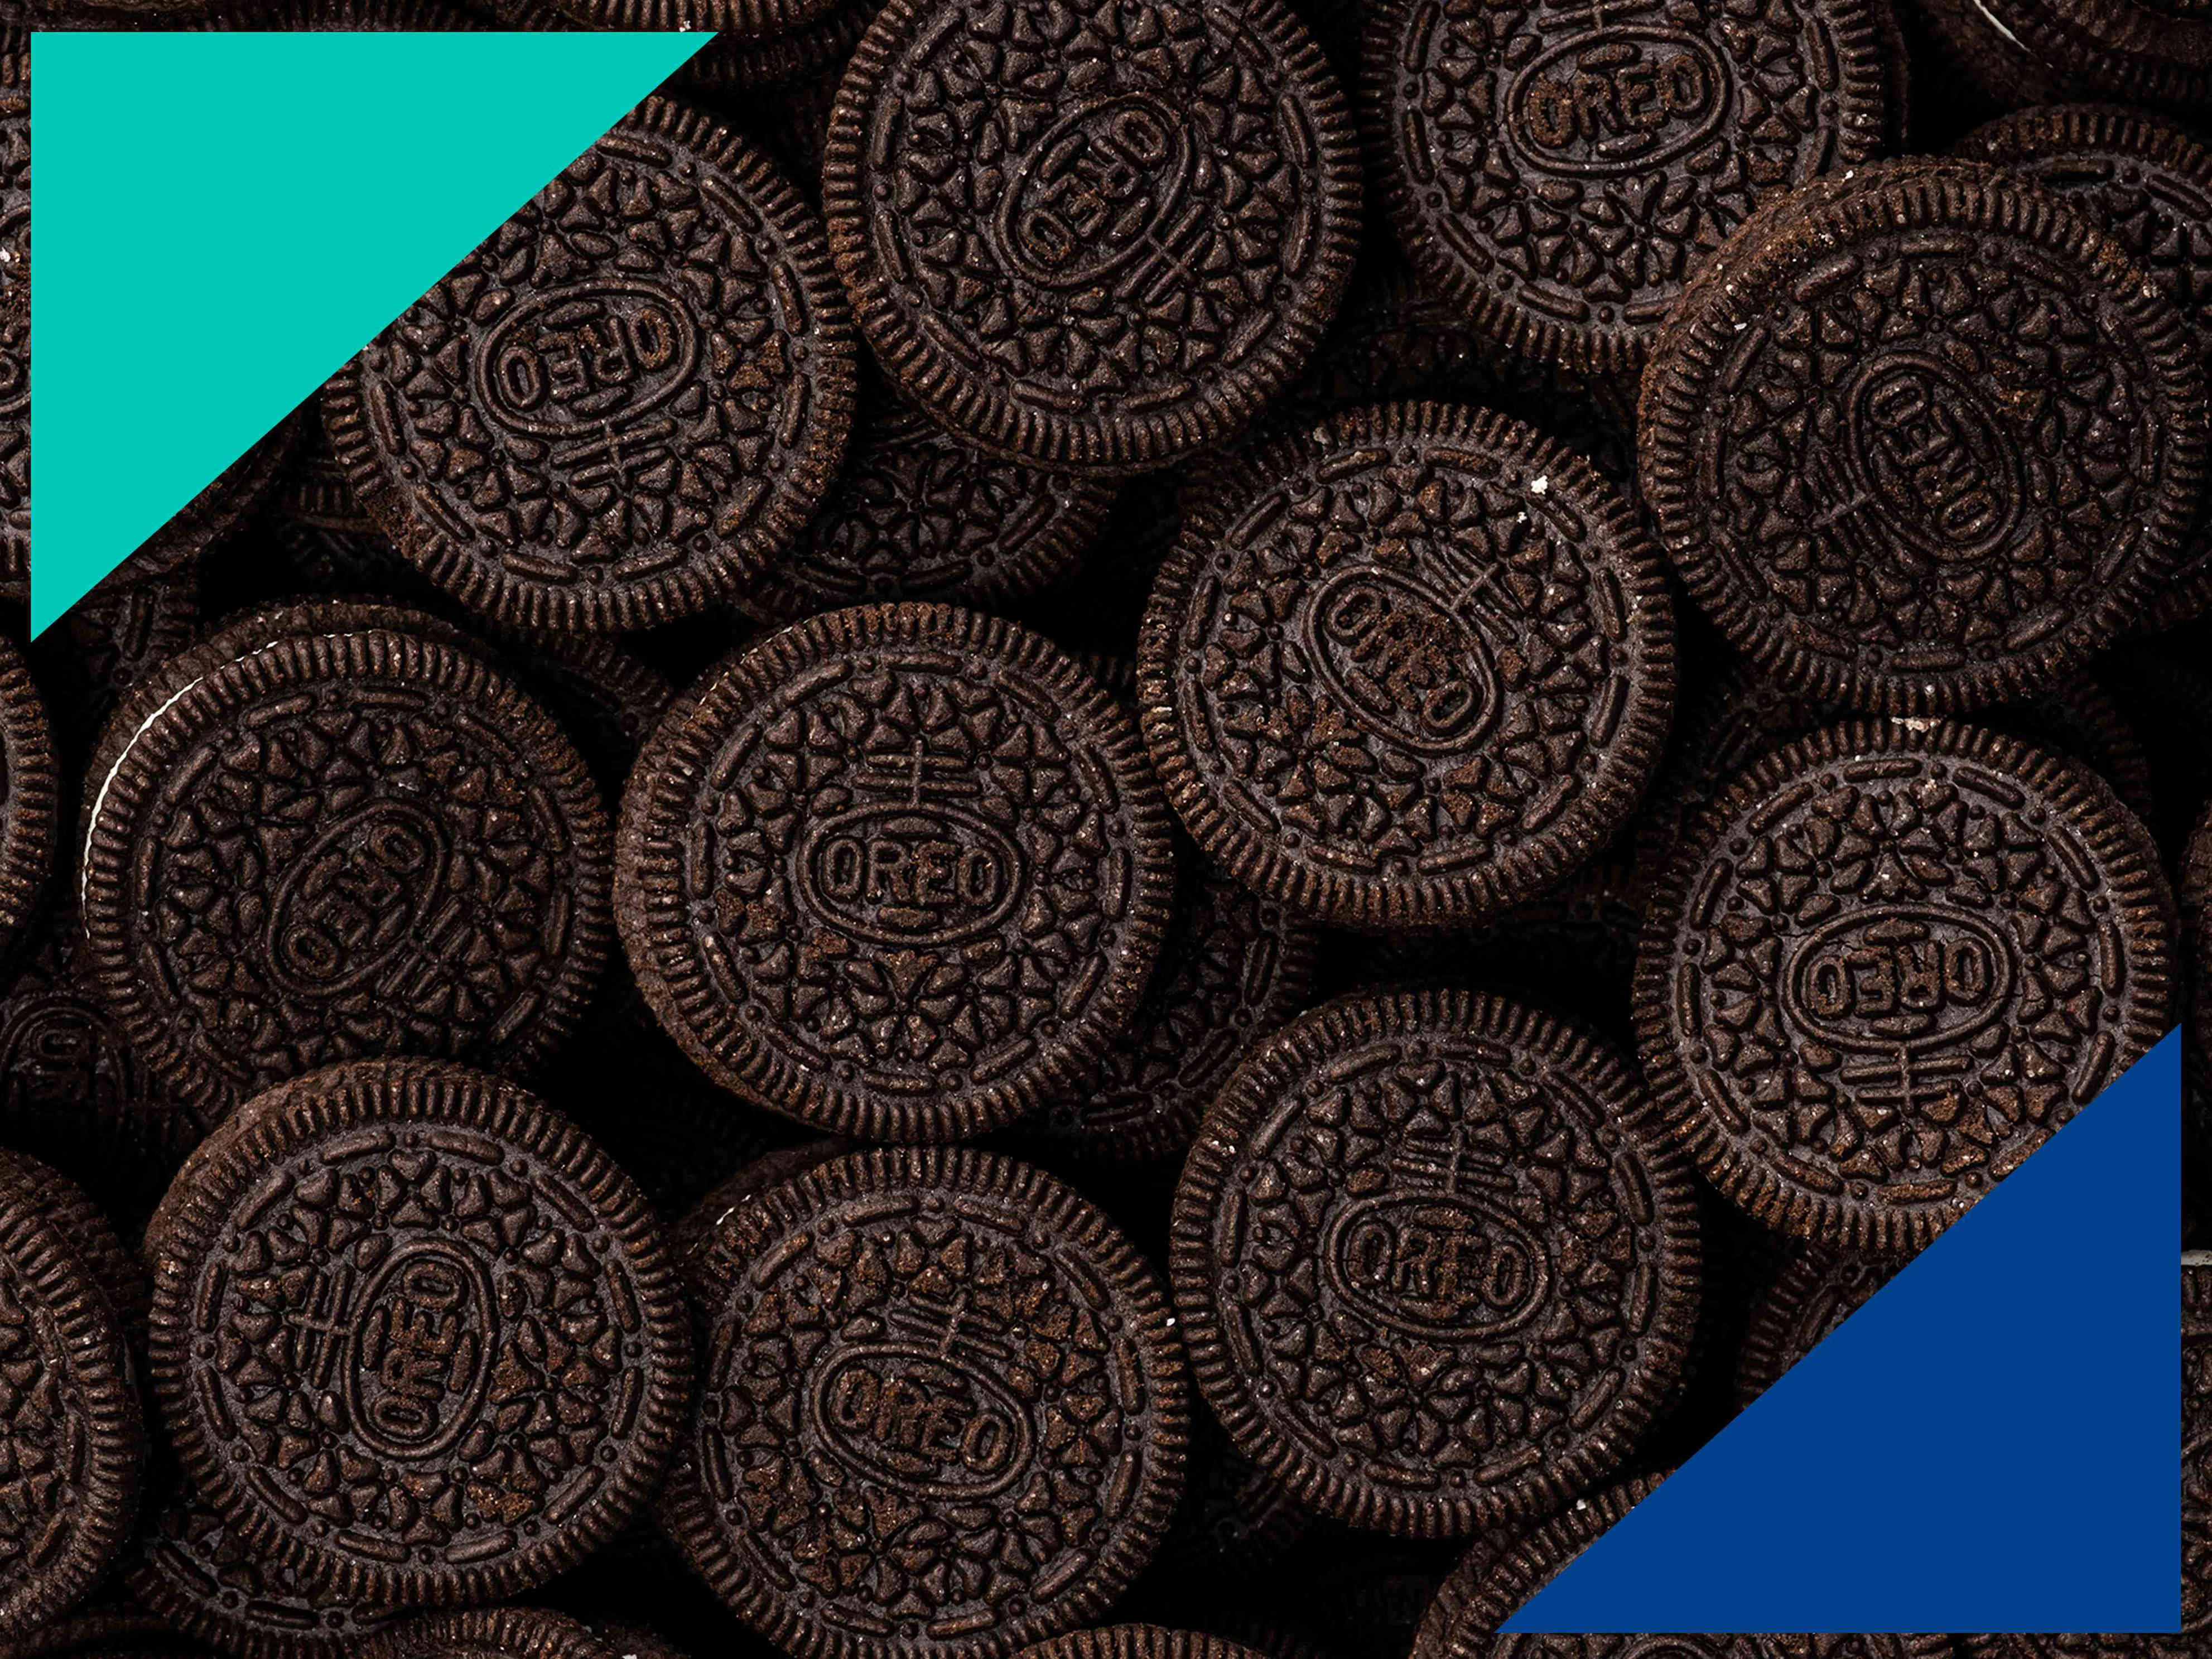 oreo has a brand new flavor coming to shelves